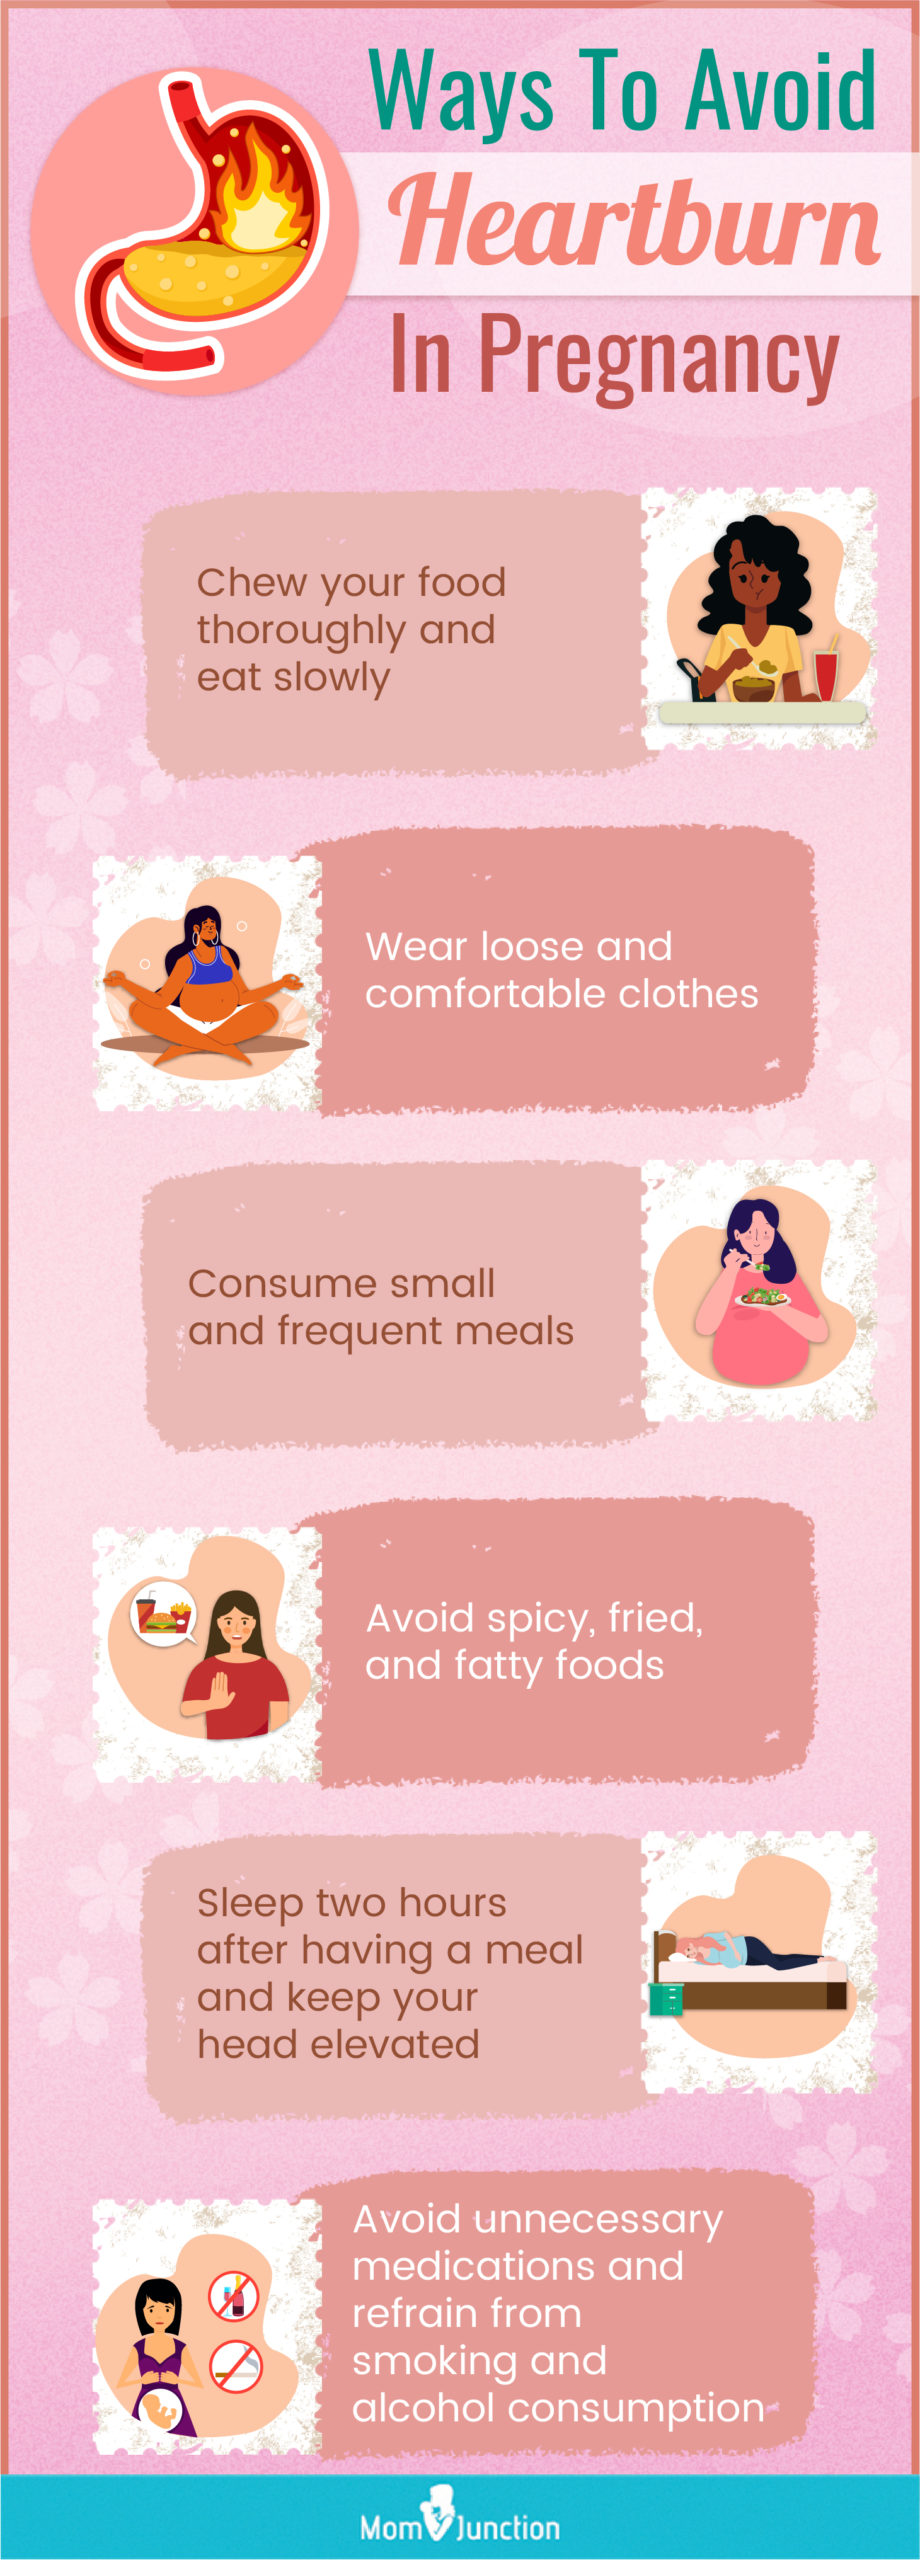 ways to avoid heartburn in pregnancy (infographic)